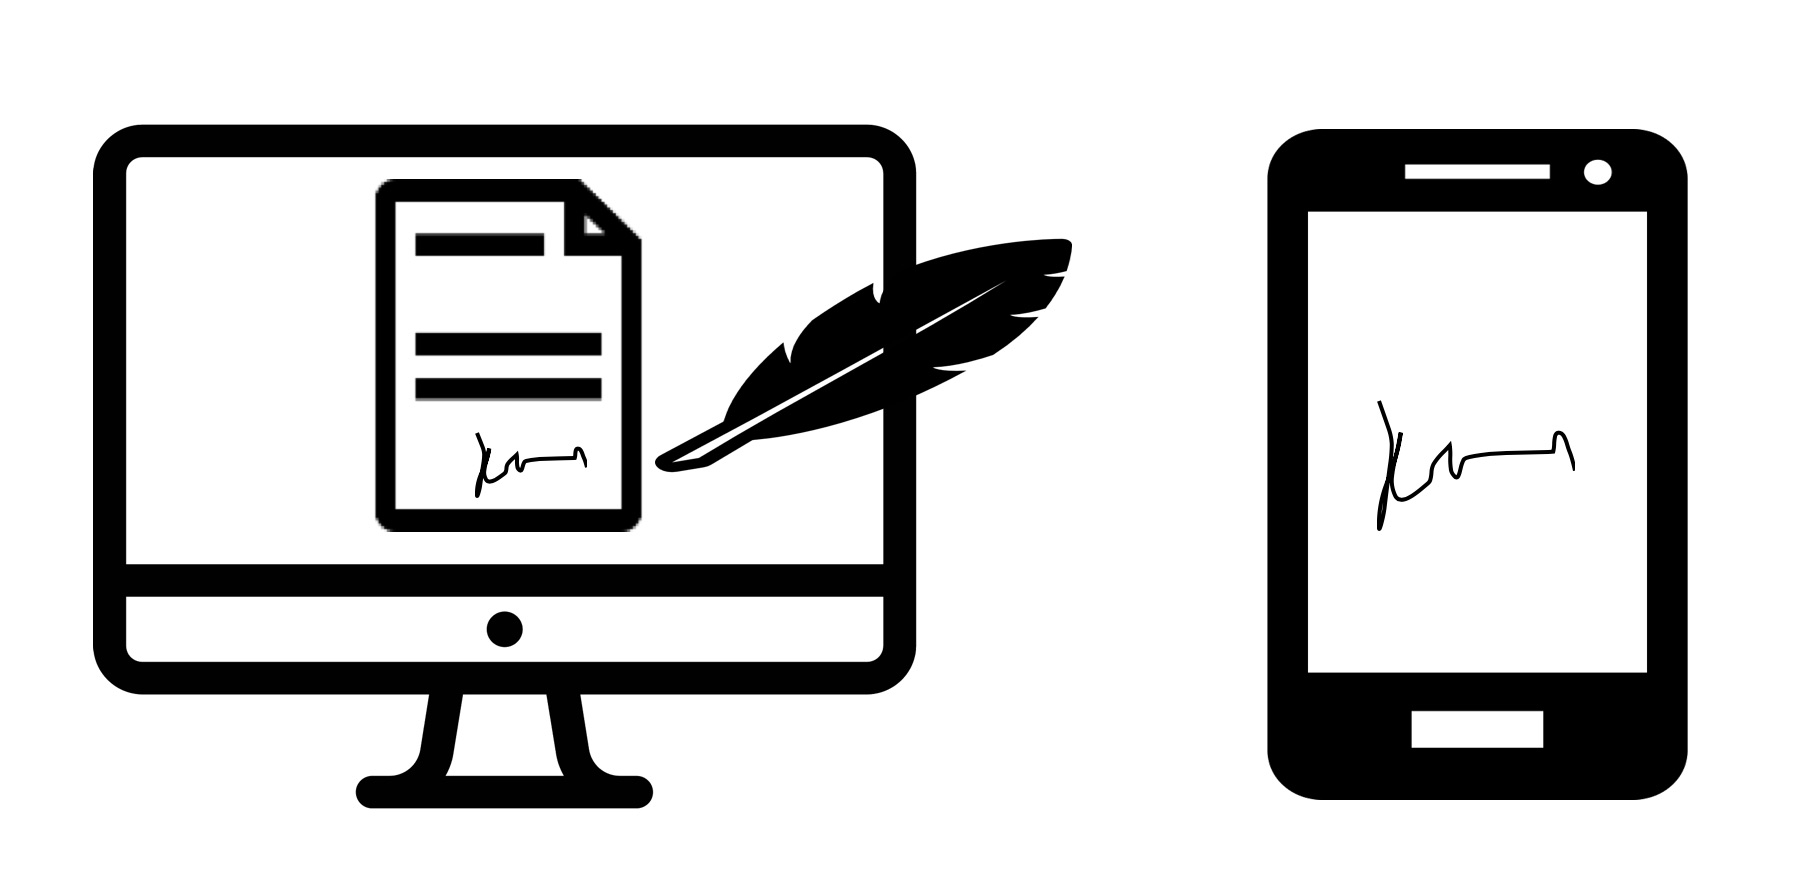 icons representing the electronic signature (screen + signature)